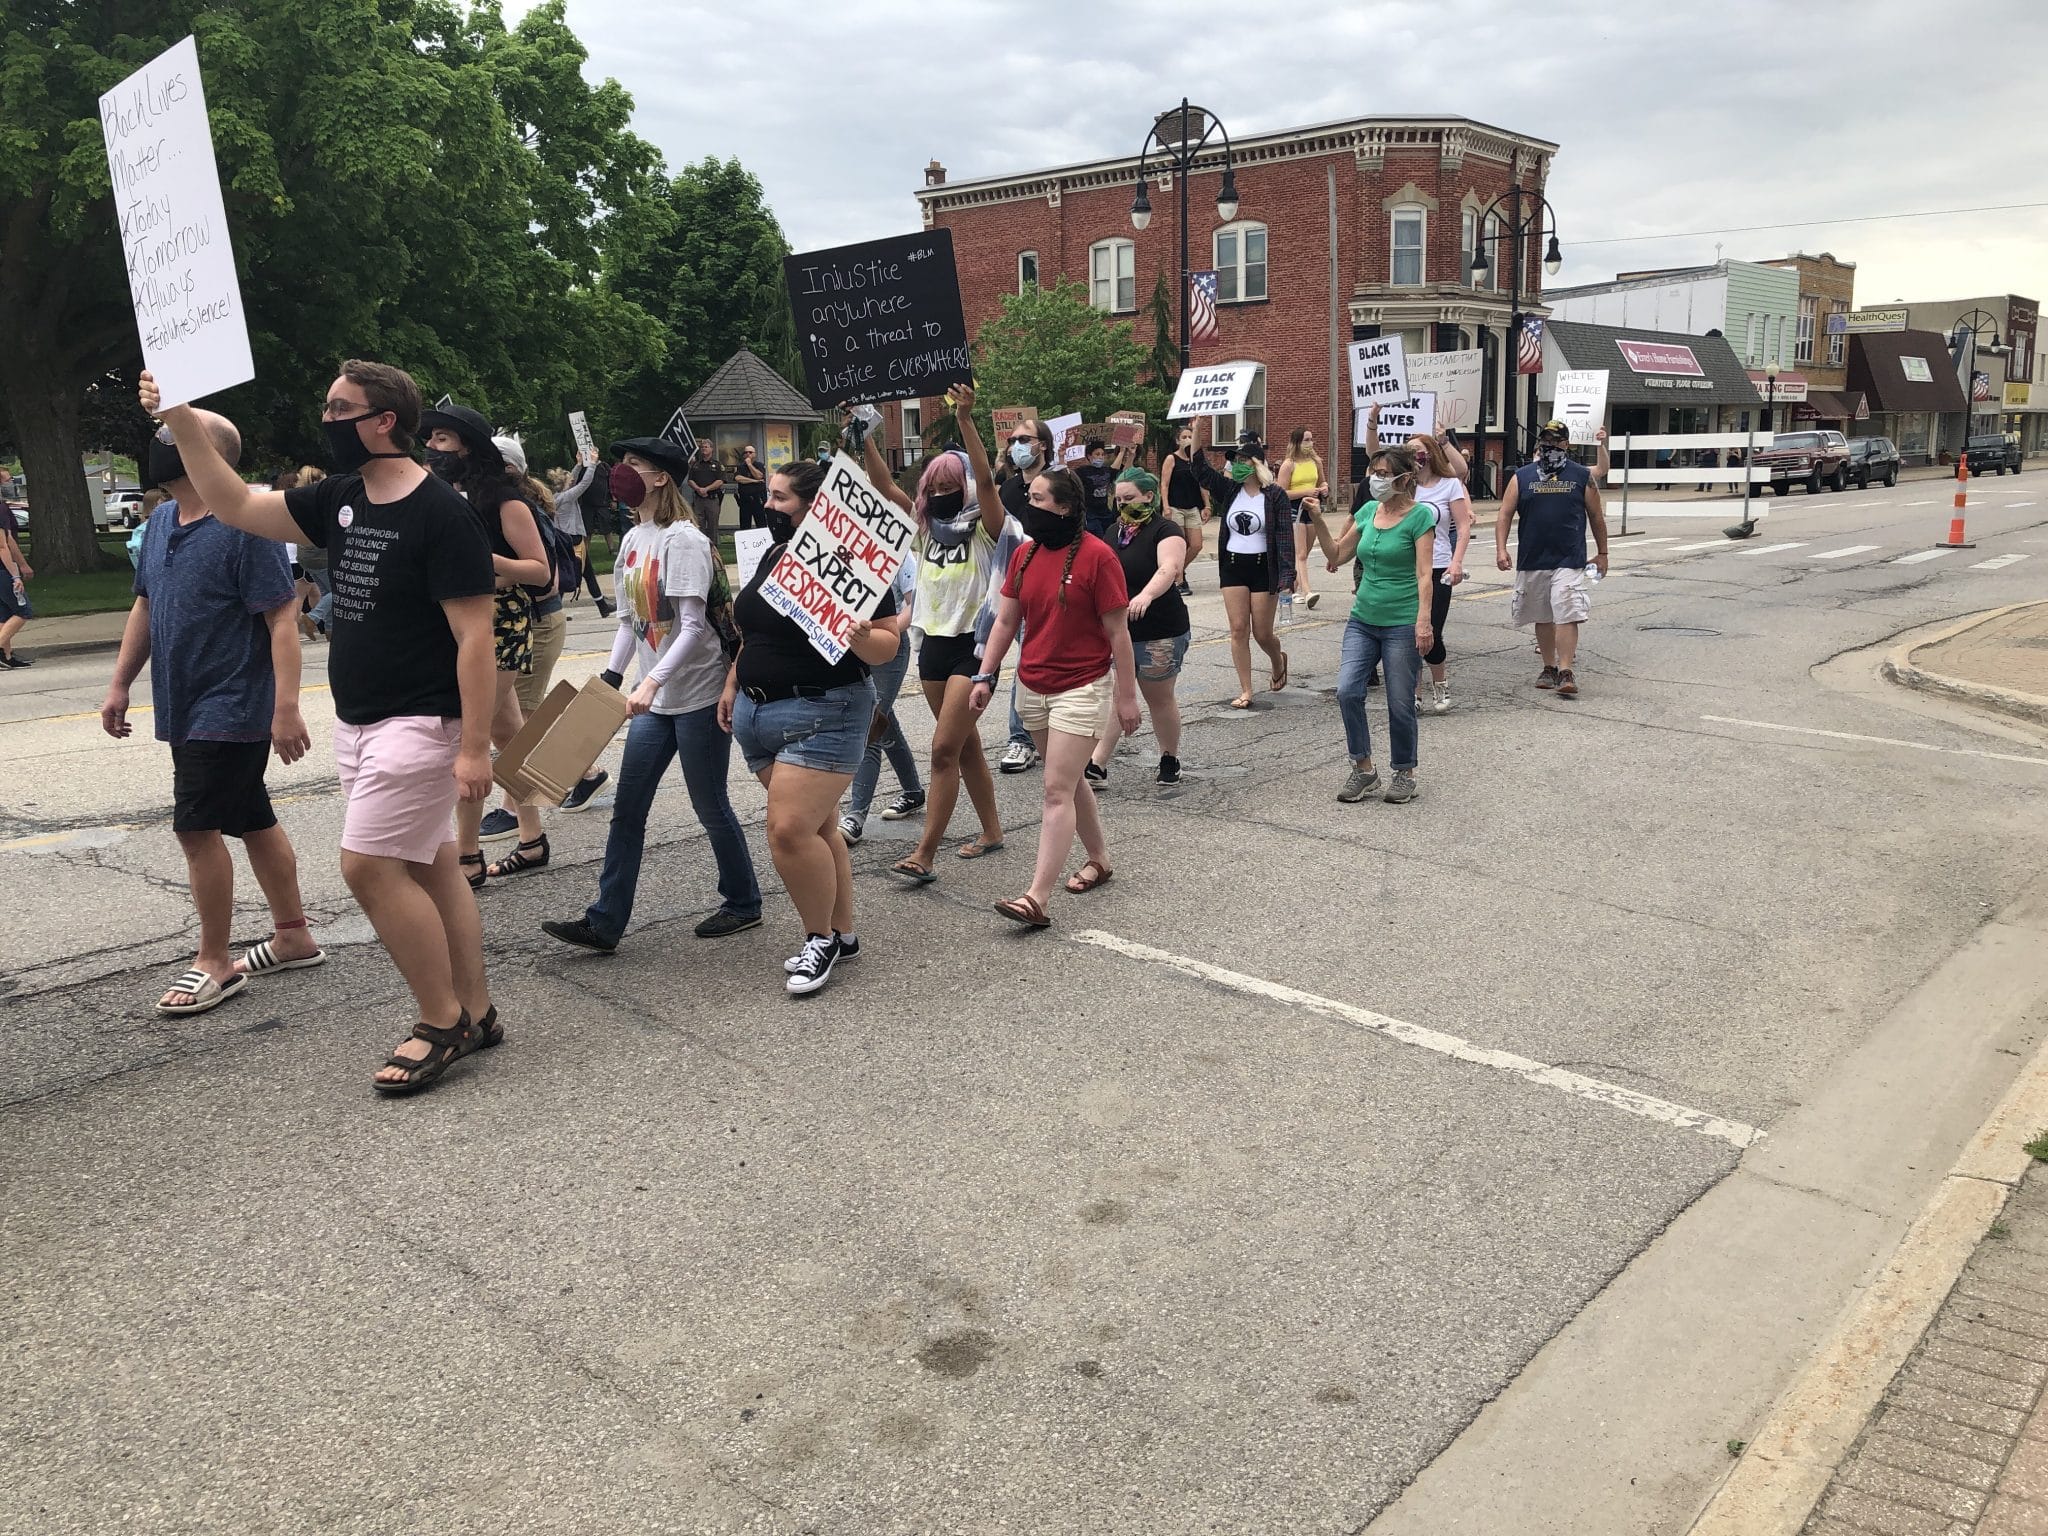 Black Lives Matter Protest Comes to Bad Axe Michigan